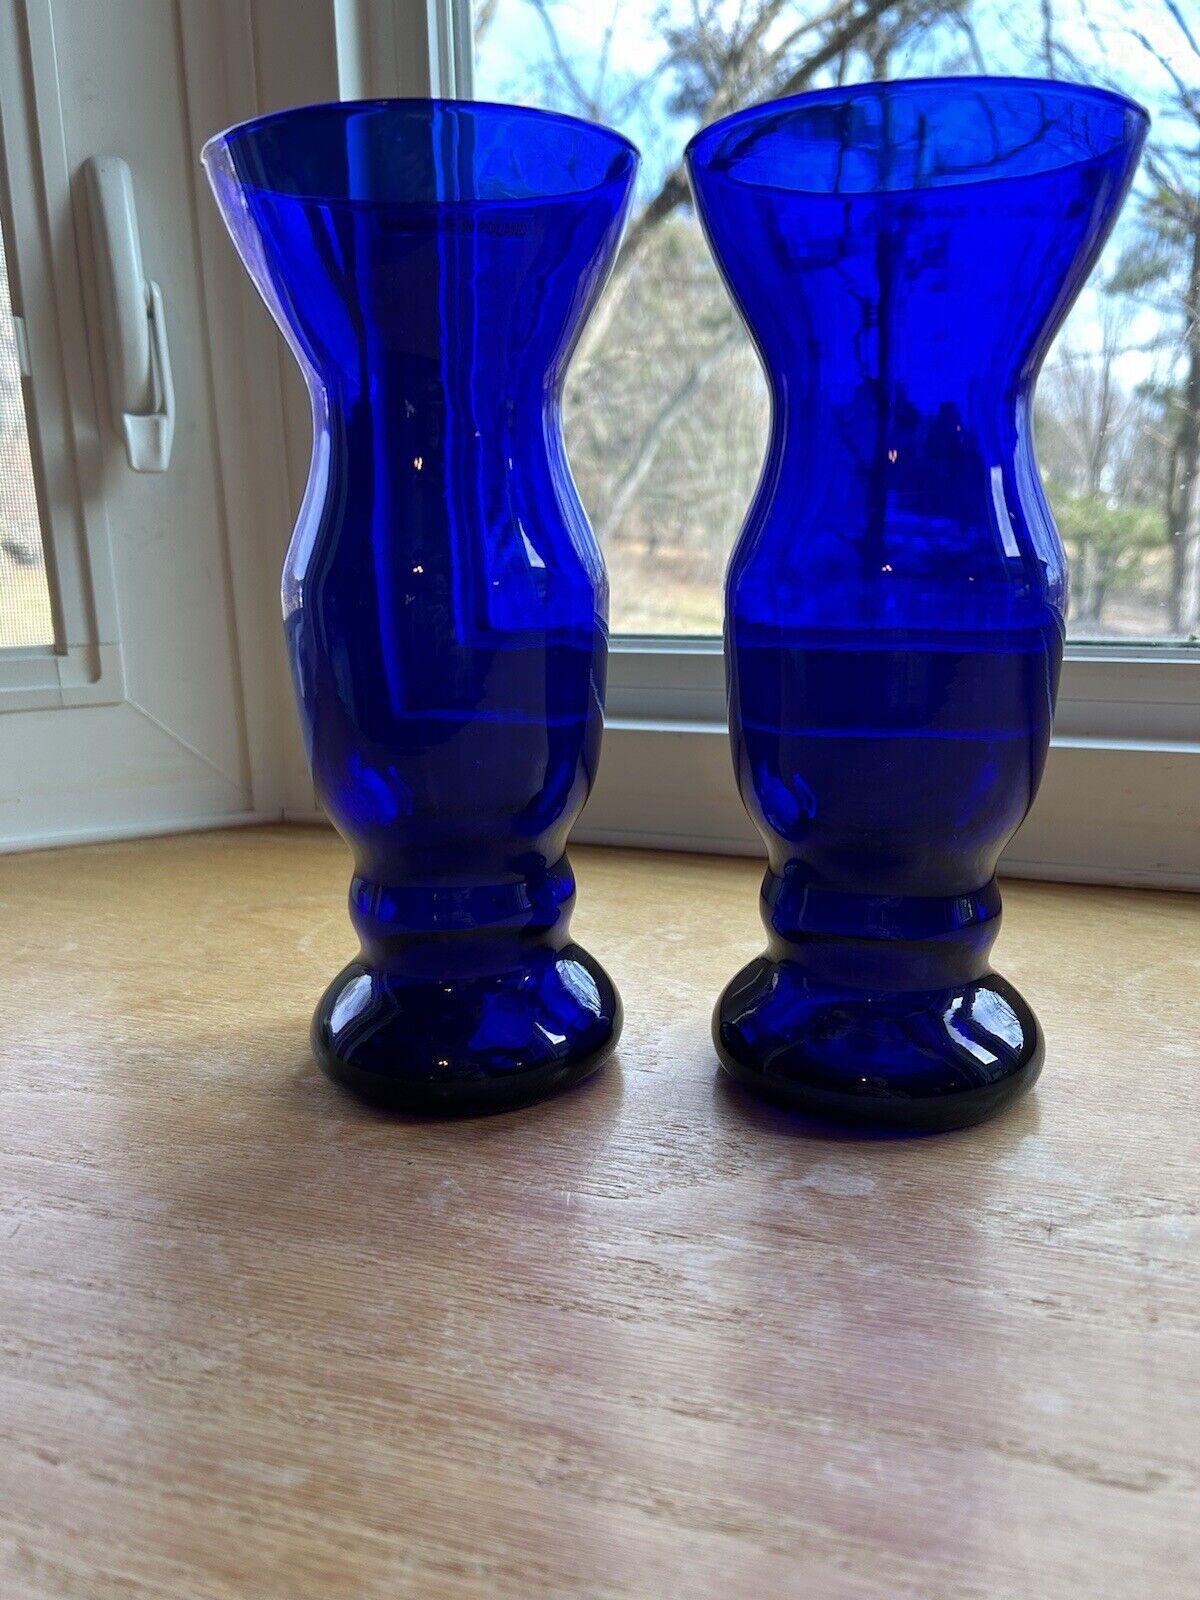 Vase Set Of 2 Cobalt Blue Hand Blown Glass Made In Poland 9” Tall W/ Tags